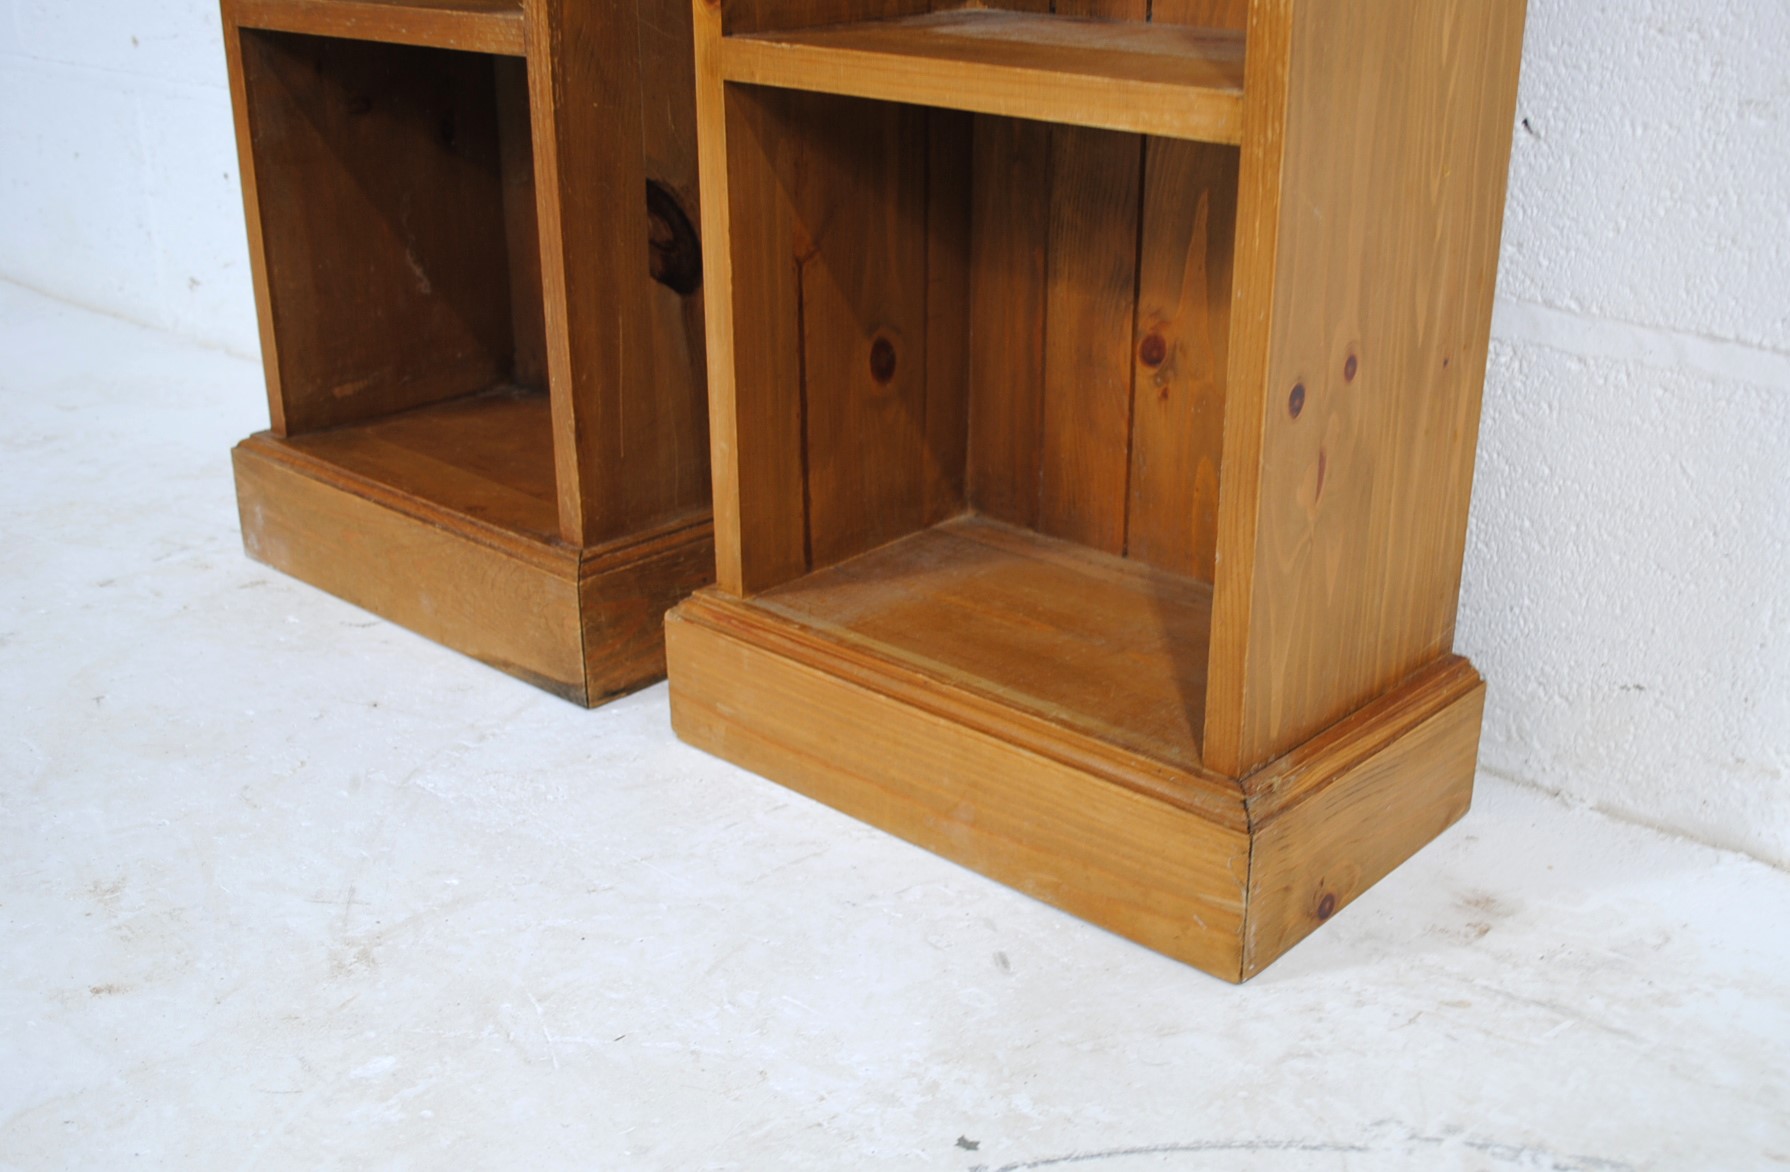 A pair of narrow pine bookcases - length 35.5cm, depth 20.5cm, height 128cm (each) - Image 4 of 4